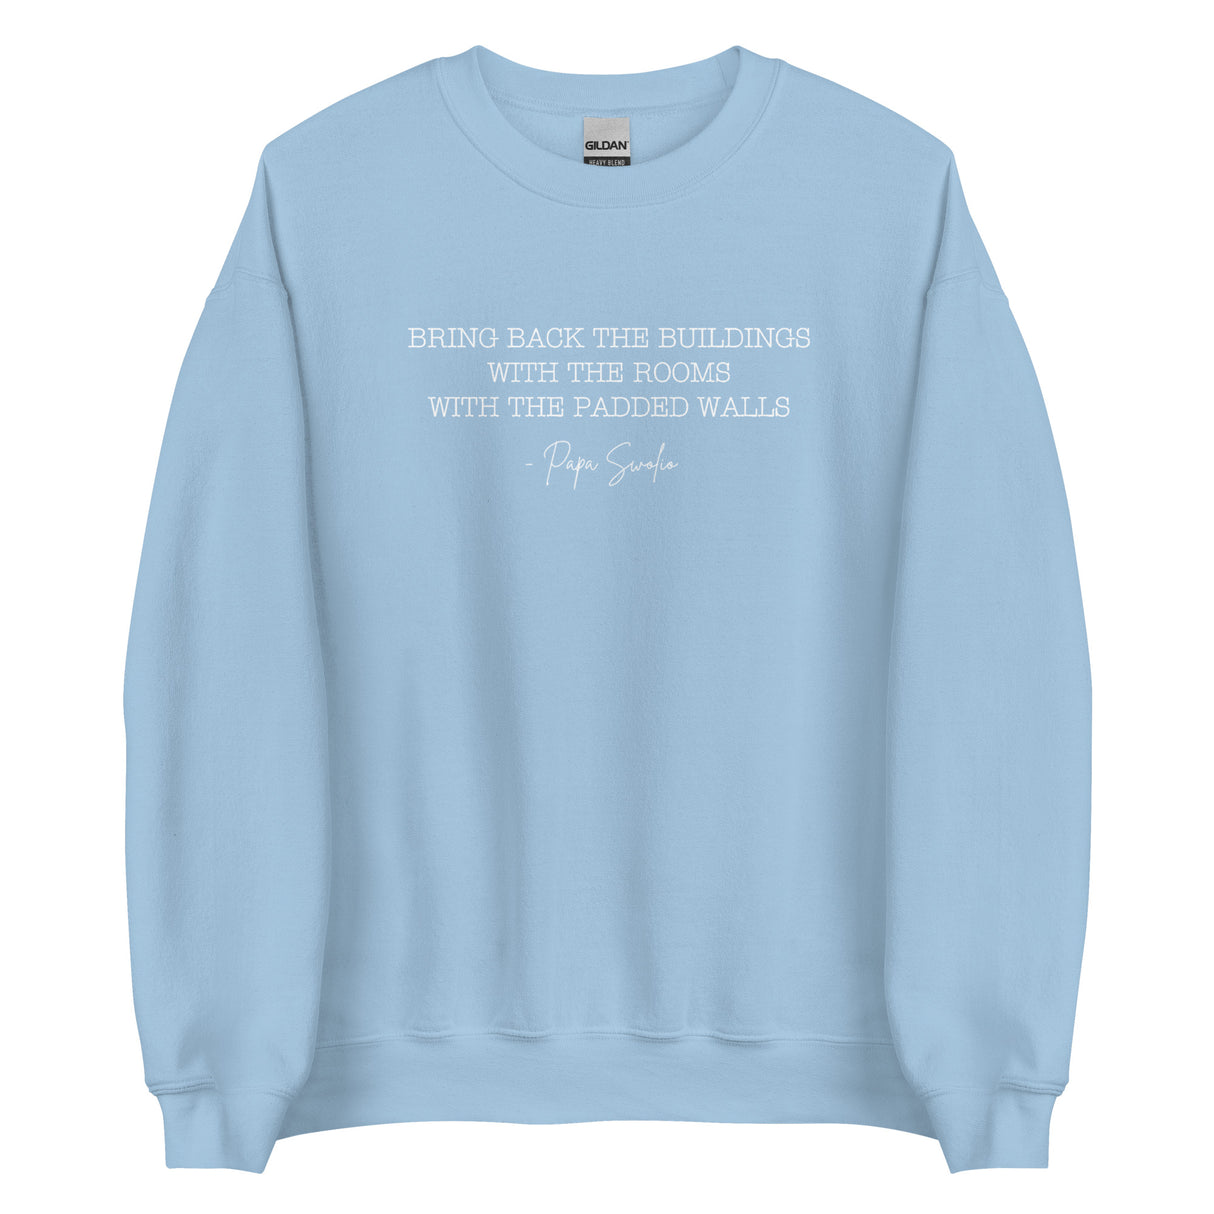 Bring Back the Buildings With the Rooms With the Padded Walls Sweatshirt